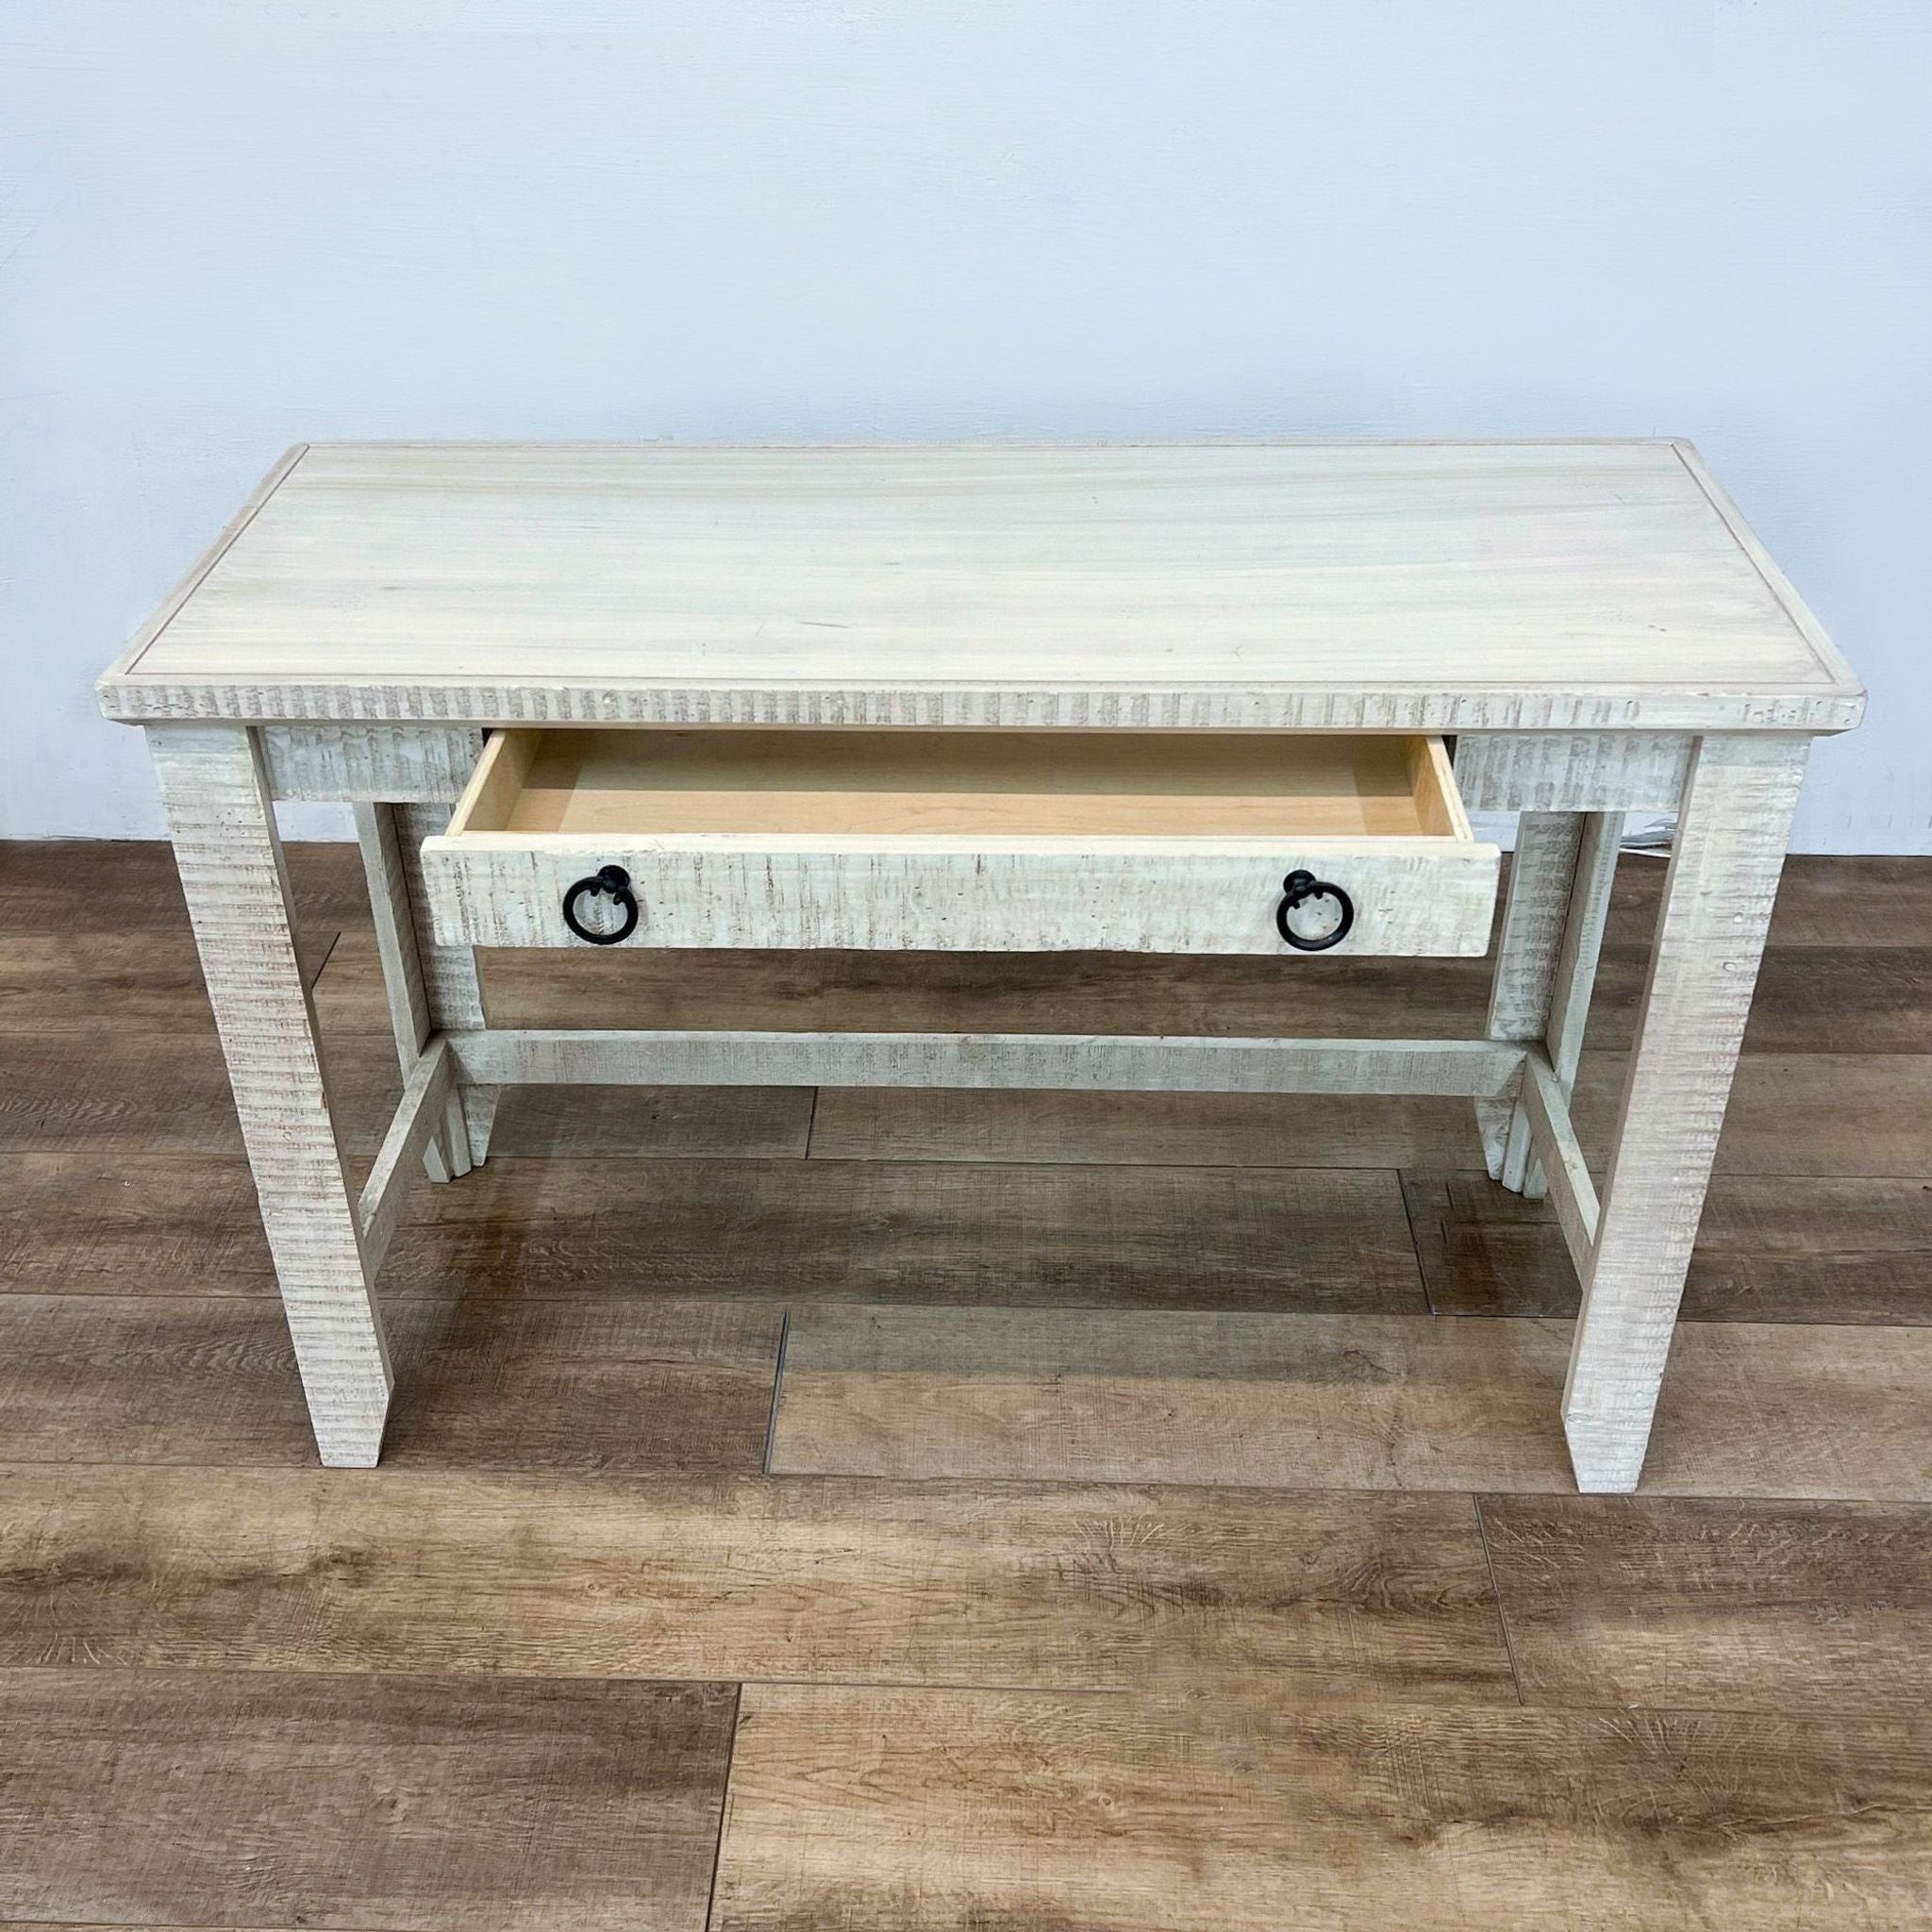 Open drawer on a Reperch side table showing the interior, with a textured off-white finish and black ring handles.